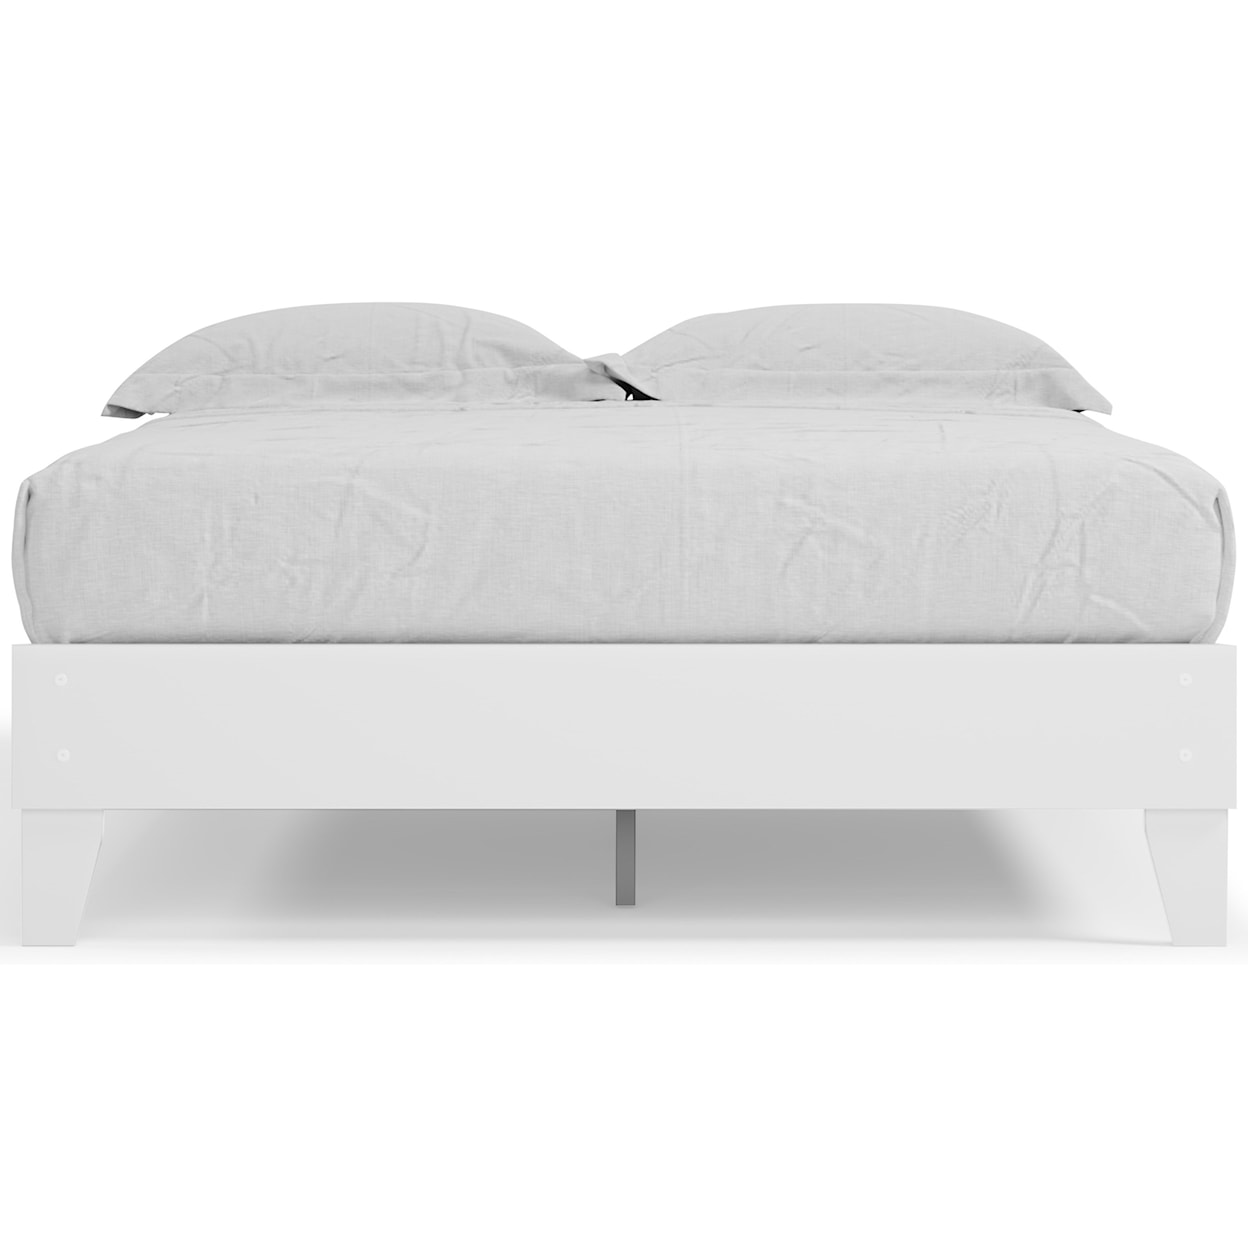 Signature Design by Ashley Piperton Queen Platform Bed